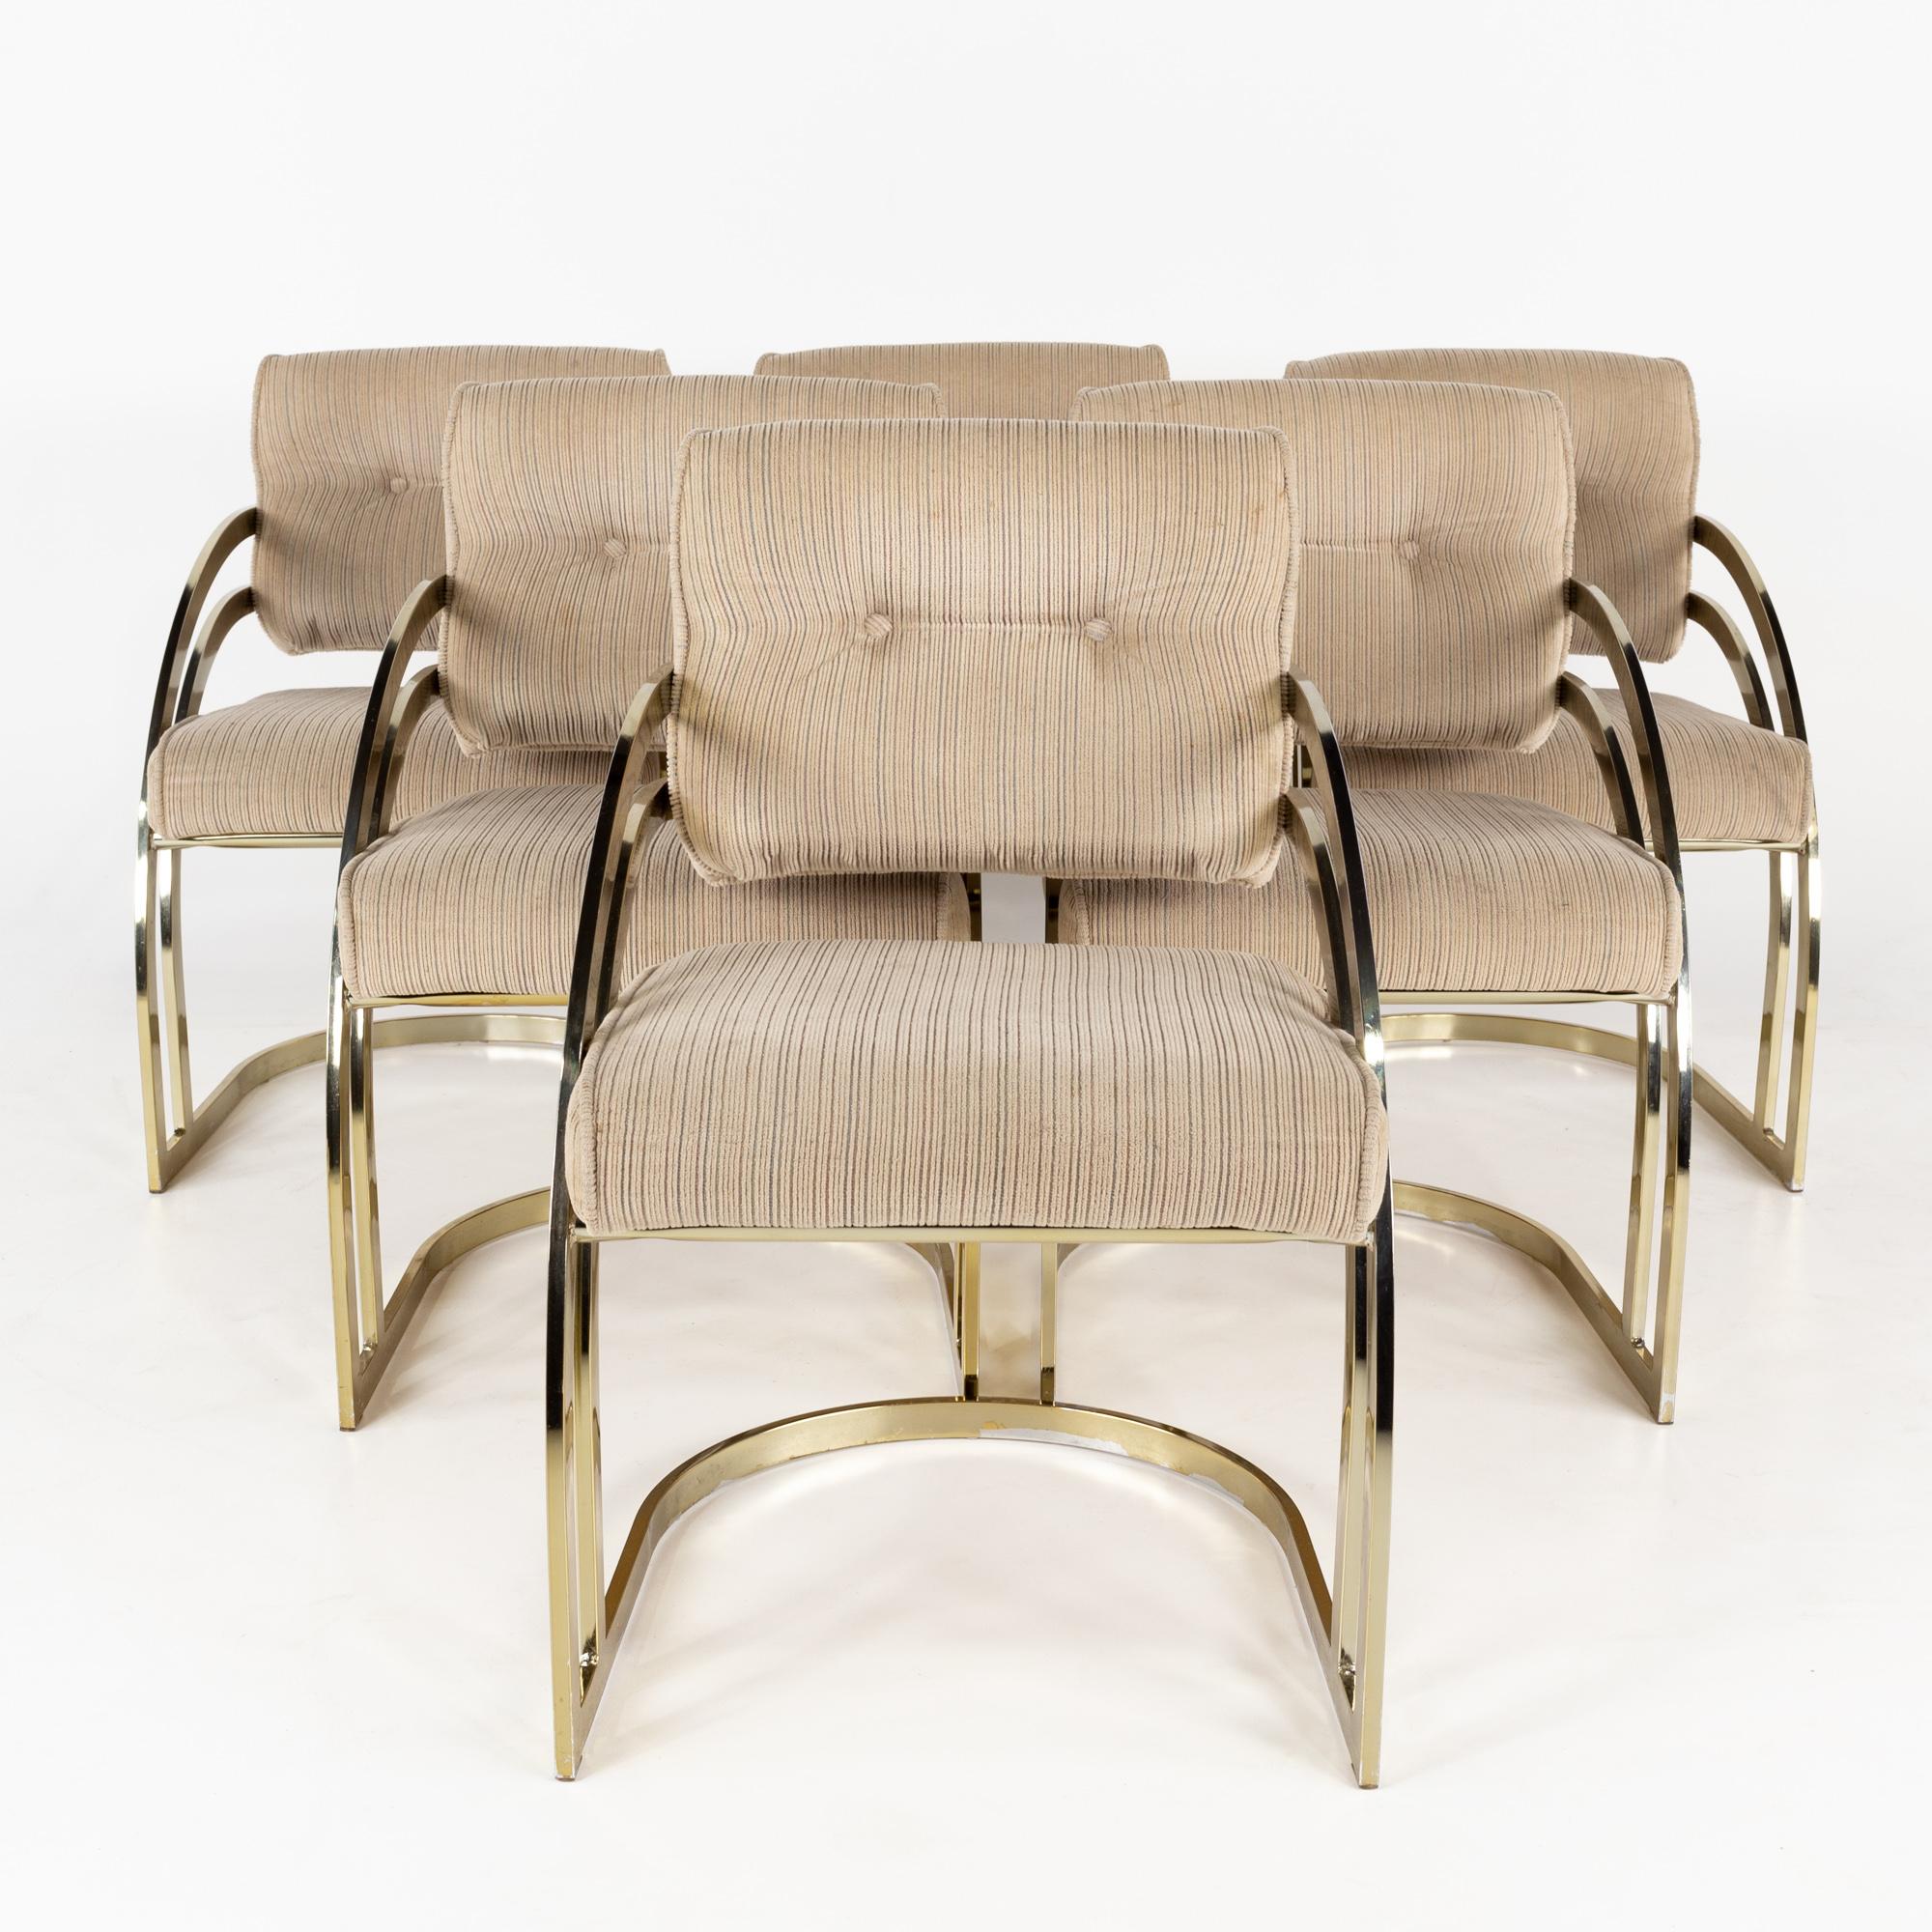 Milo Baughan style mid century brass Cantilever dining chairs - Set of 6

Each chair measures: 20 wide x 27 deep x 33 inches high, with a seat height of 19 and arm height of 25 inches

All pieces of furniture can be had in what we call restored